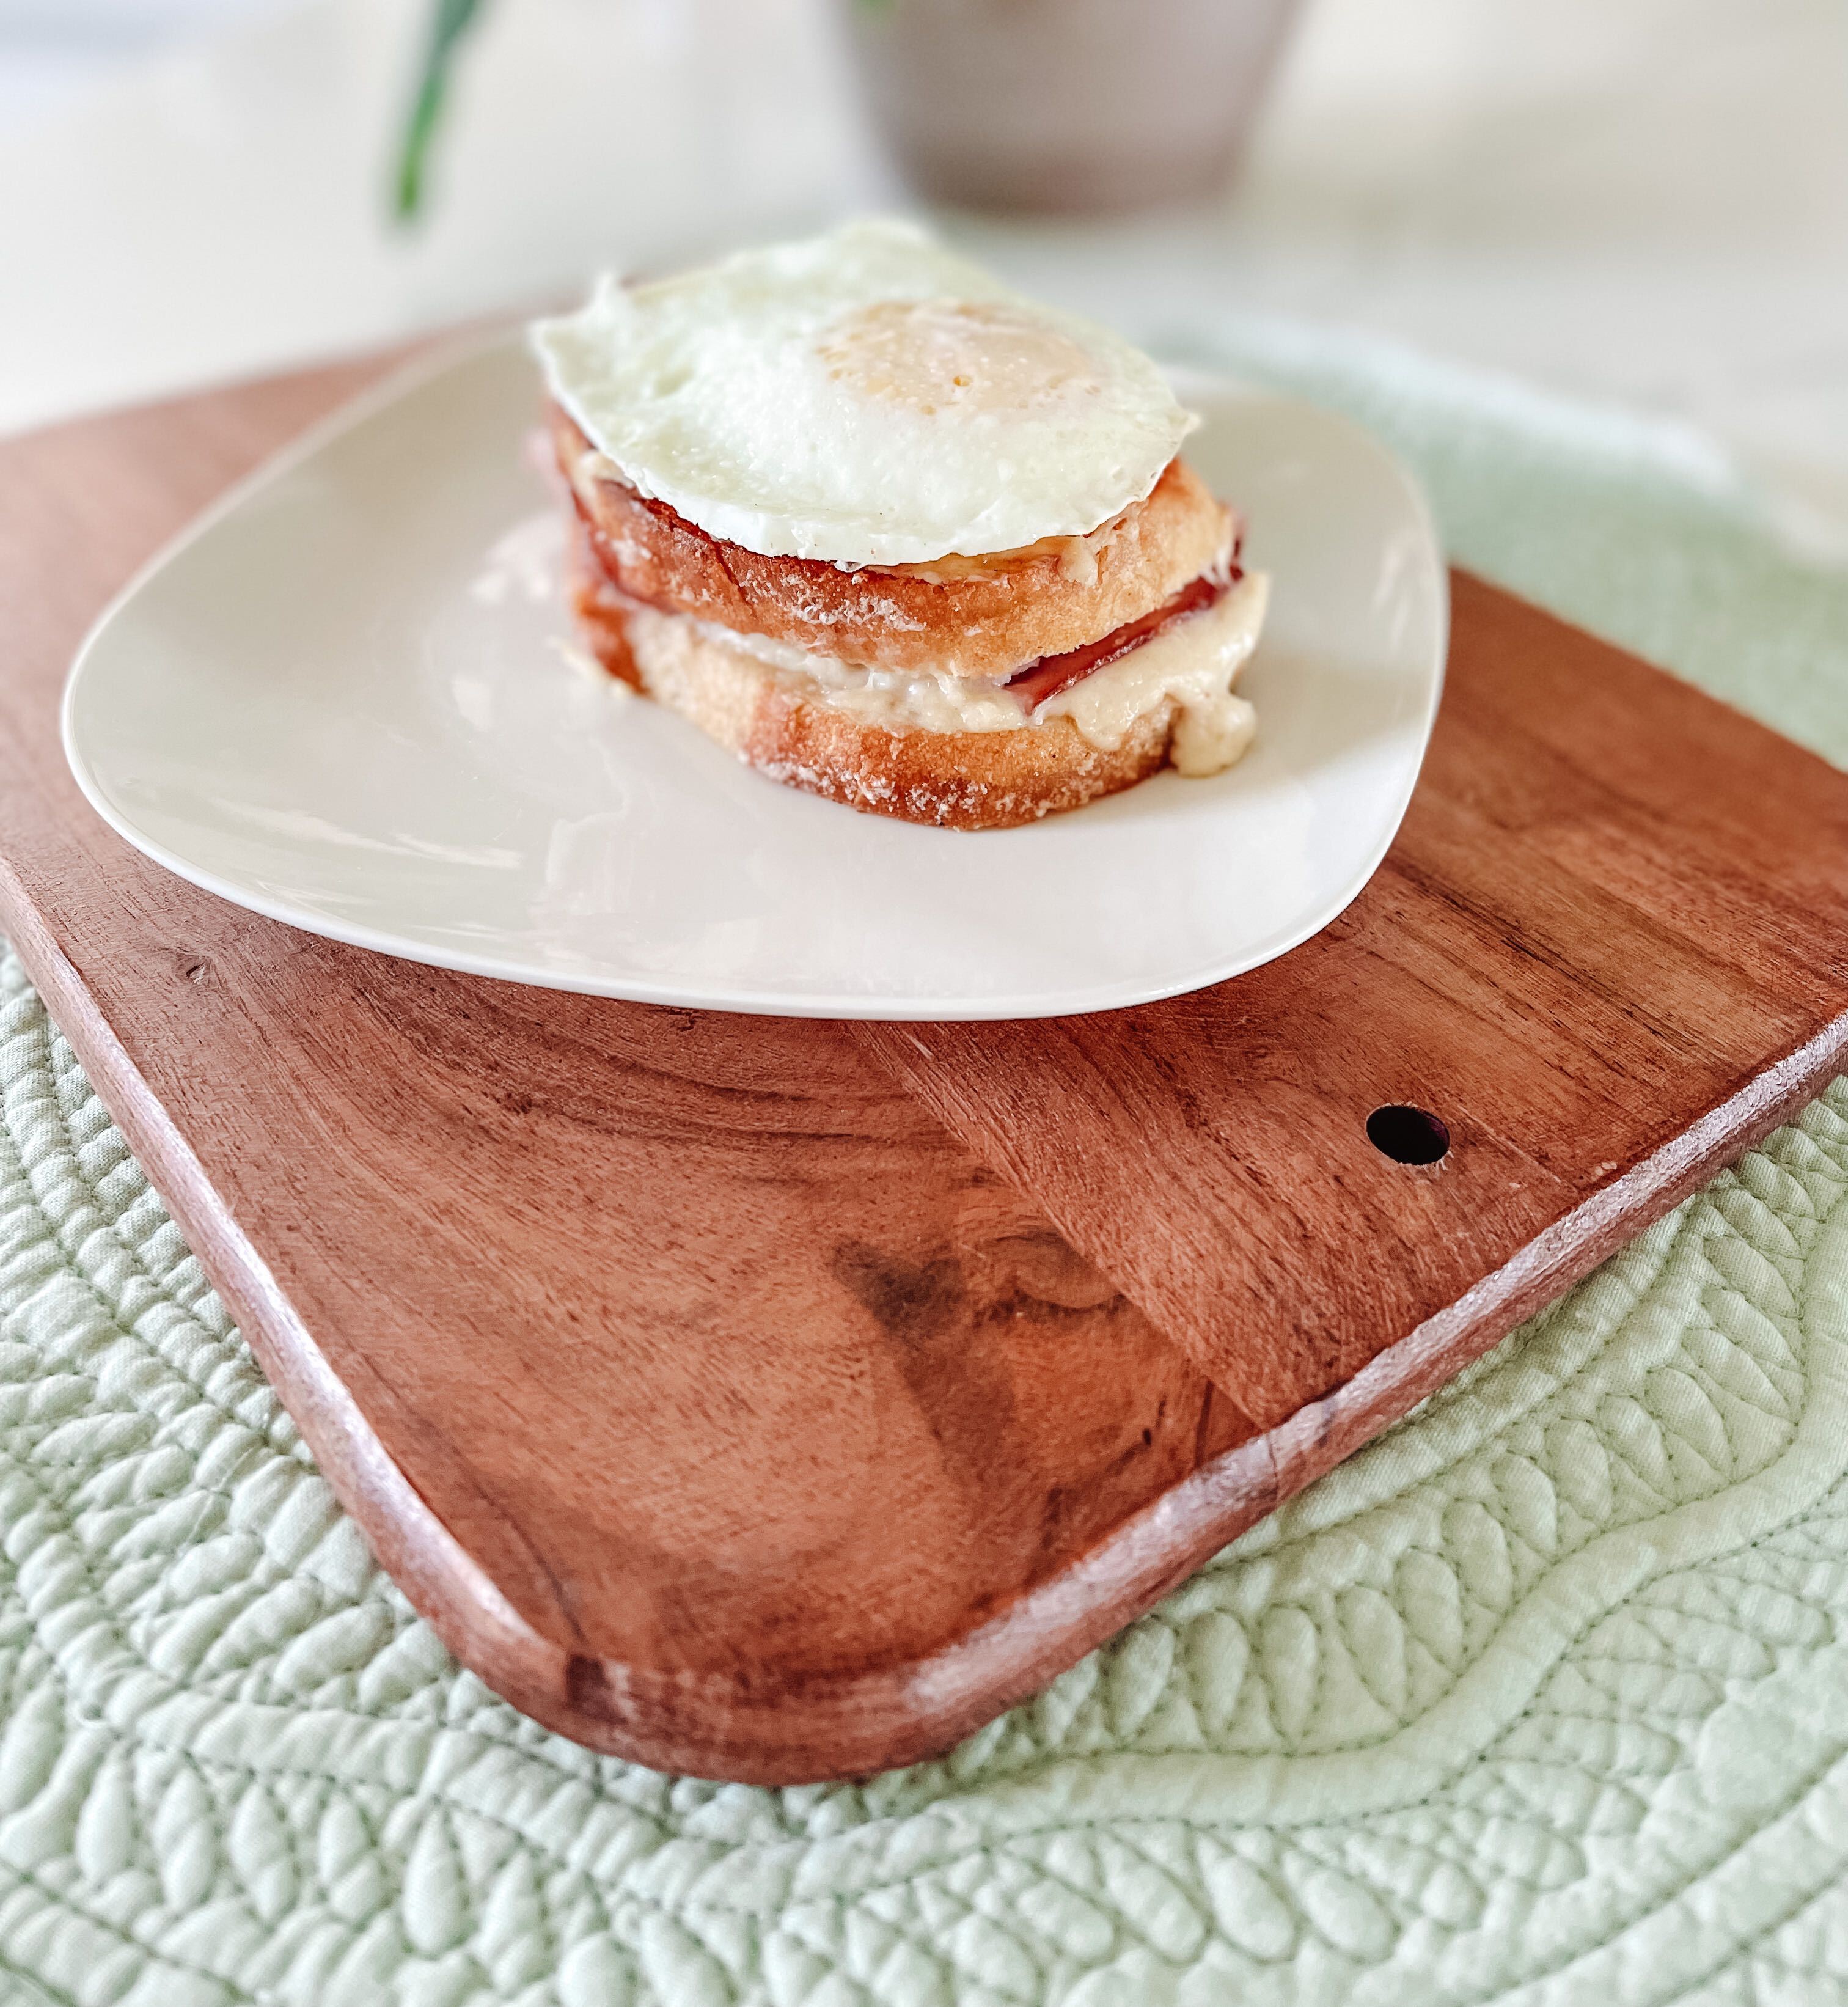 Croque Madame (Crispy Lady) Sandwiches - May 30 - St. Joan of Arc